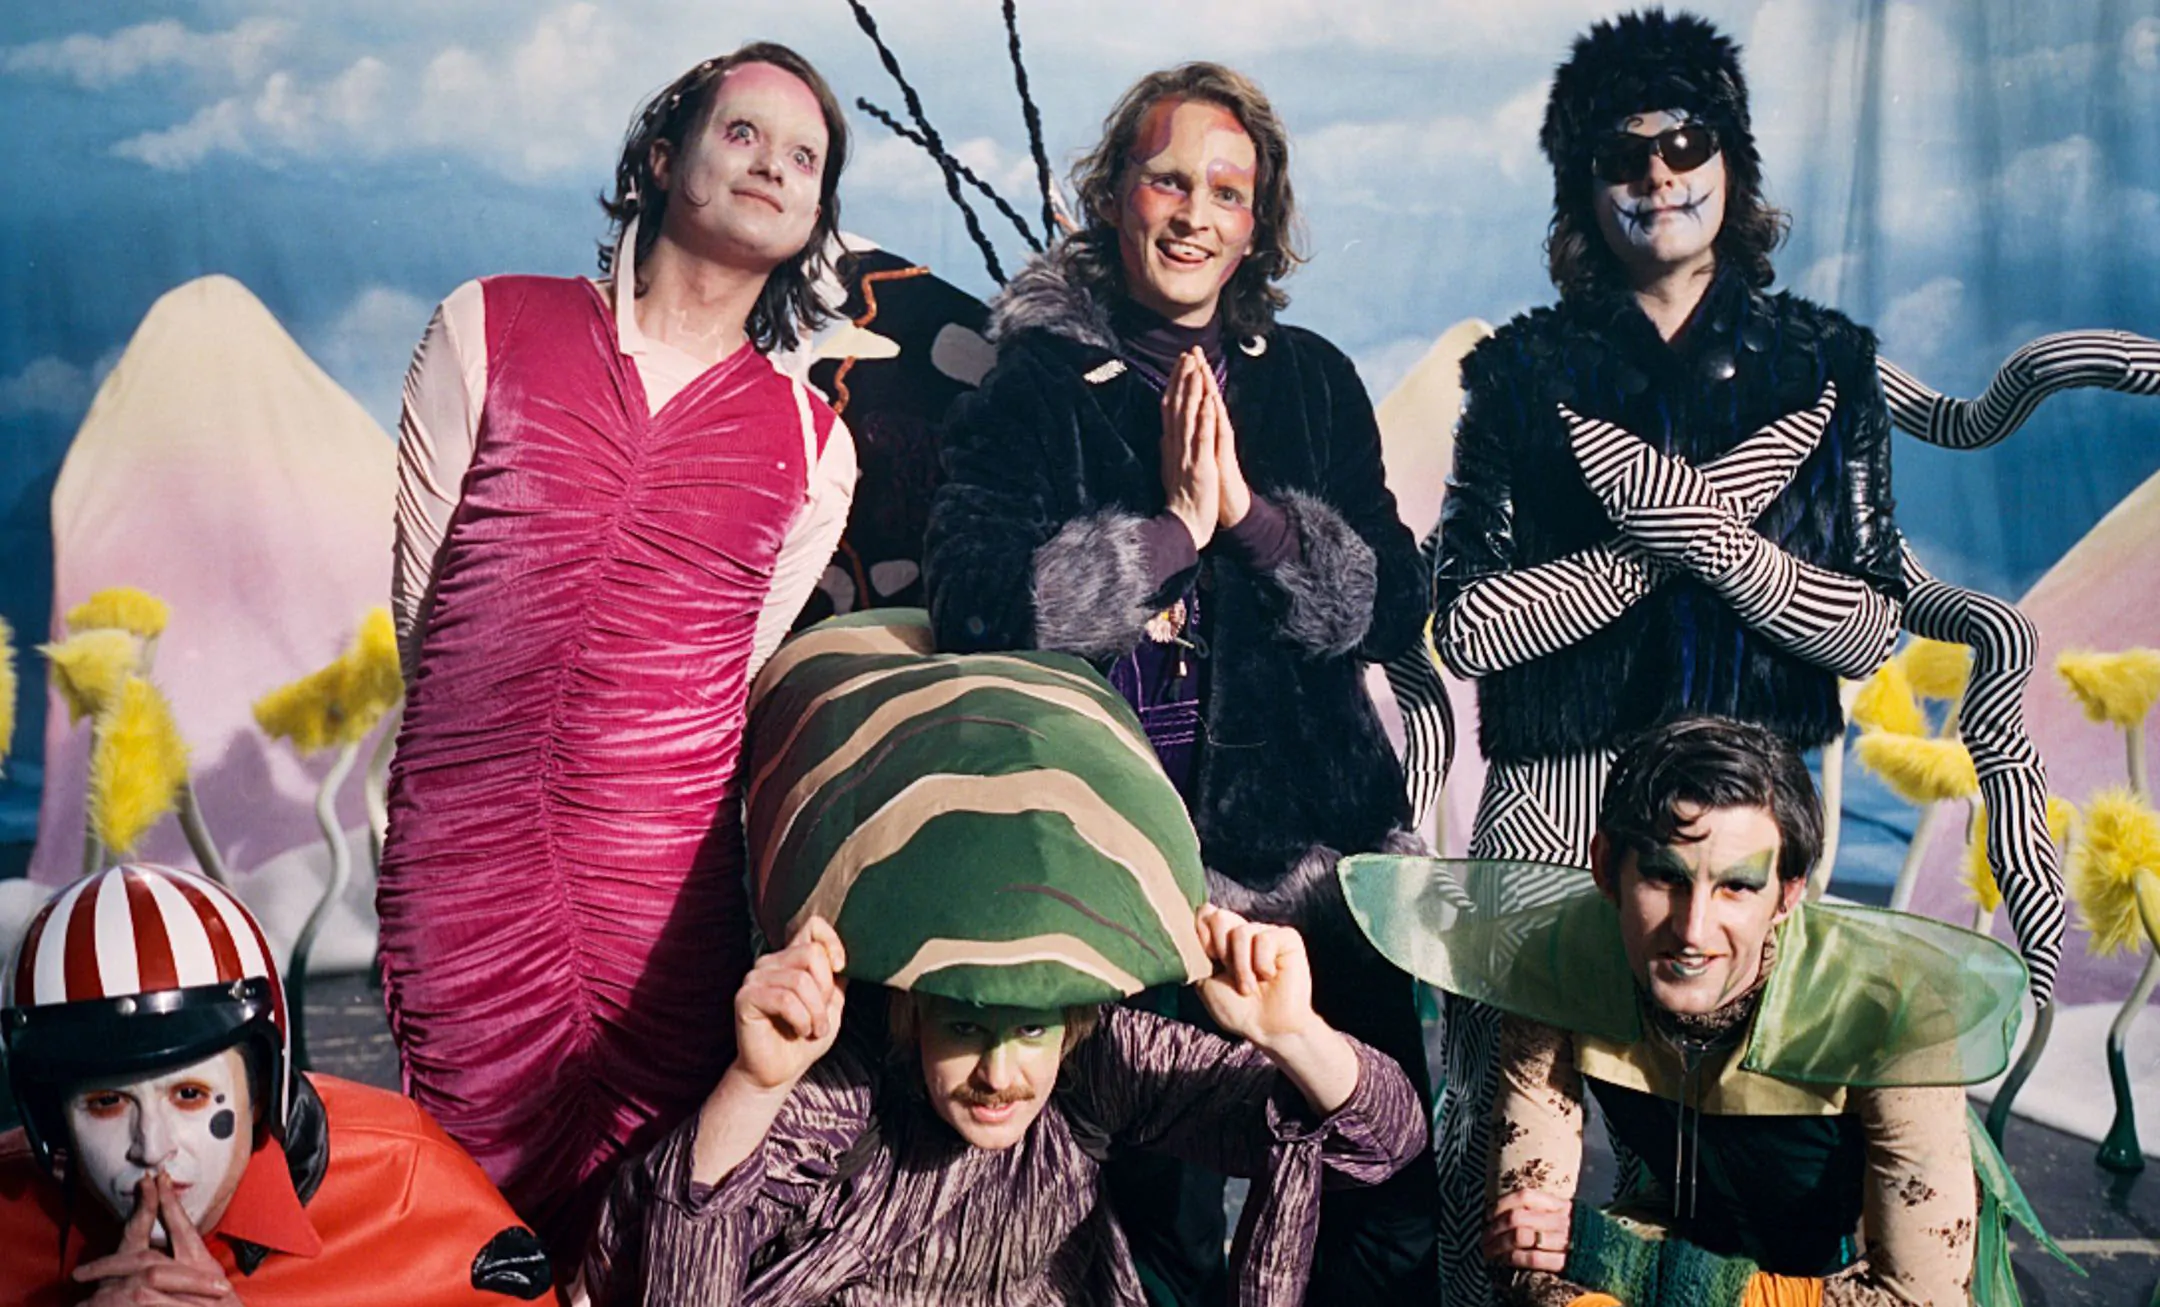 KING GIZZARD & THE LIZARD WIZARD share video for new single ‘Catching Smoke’ – Watch Now!